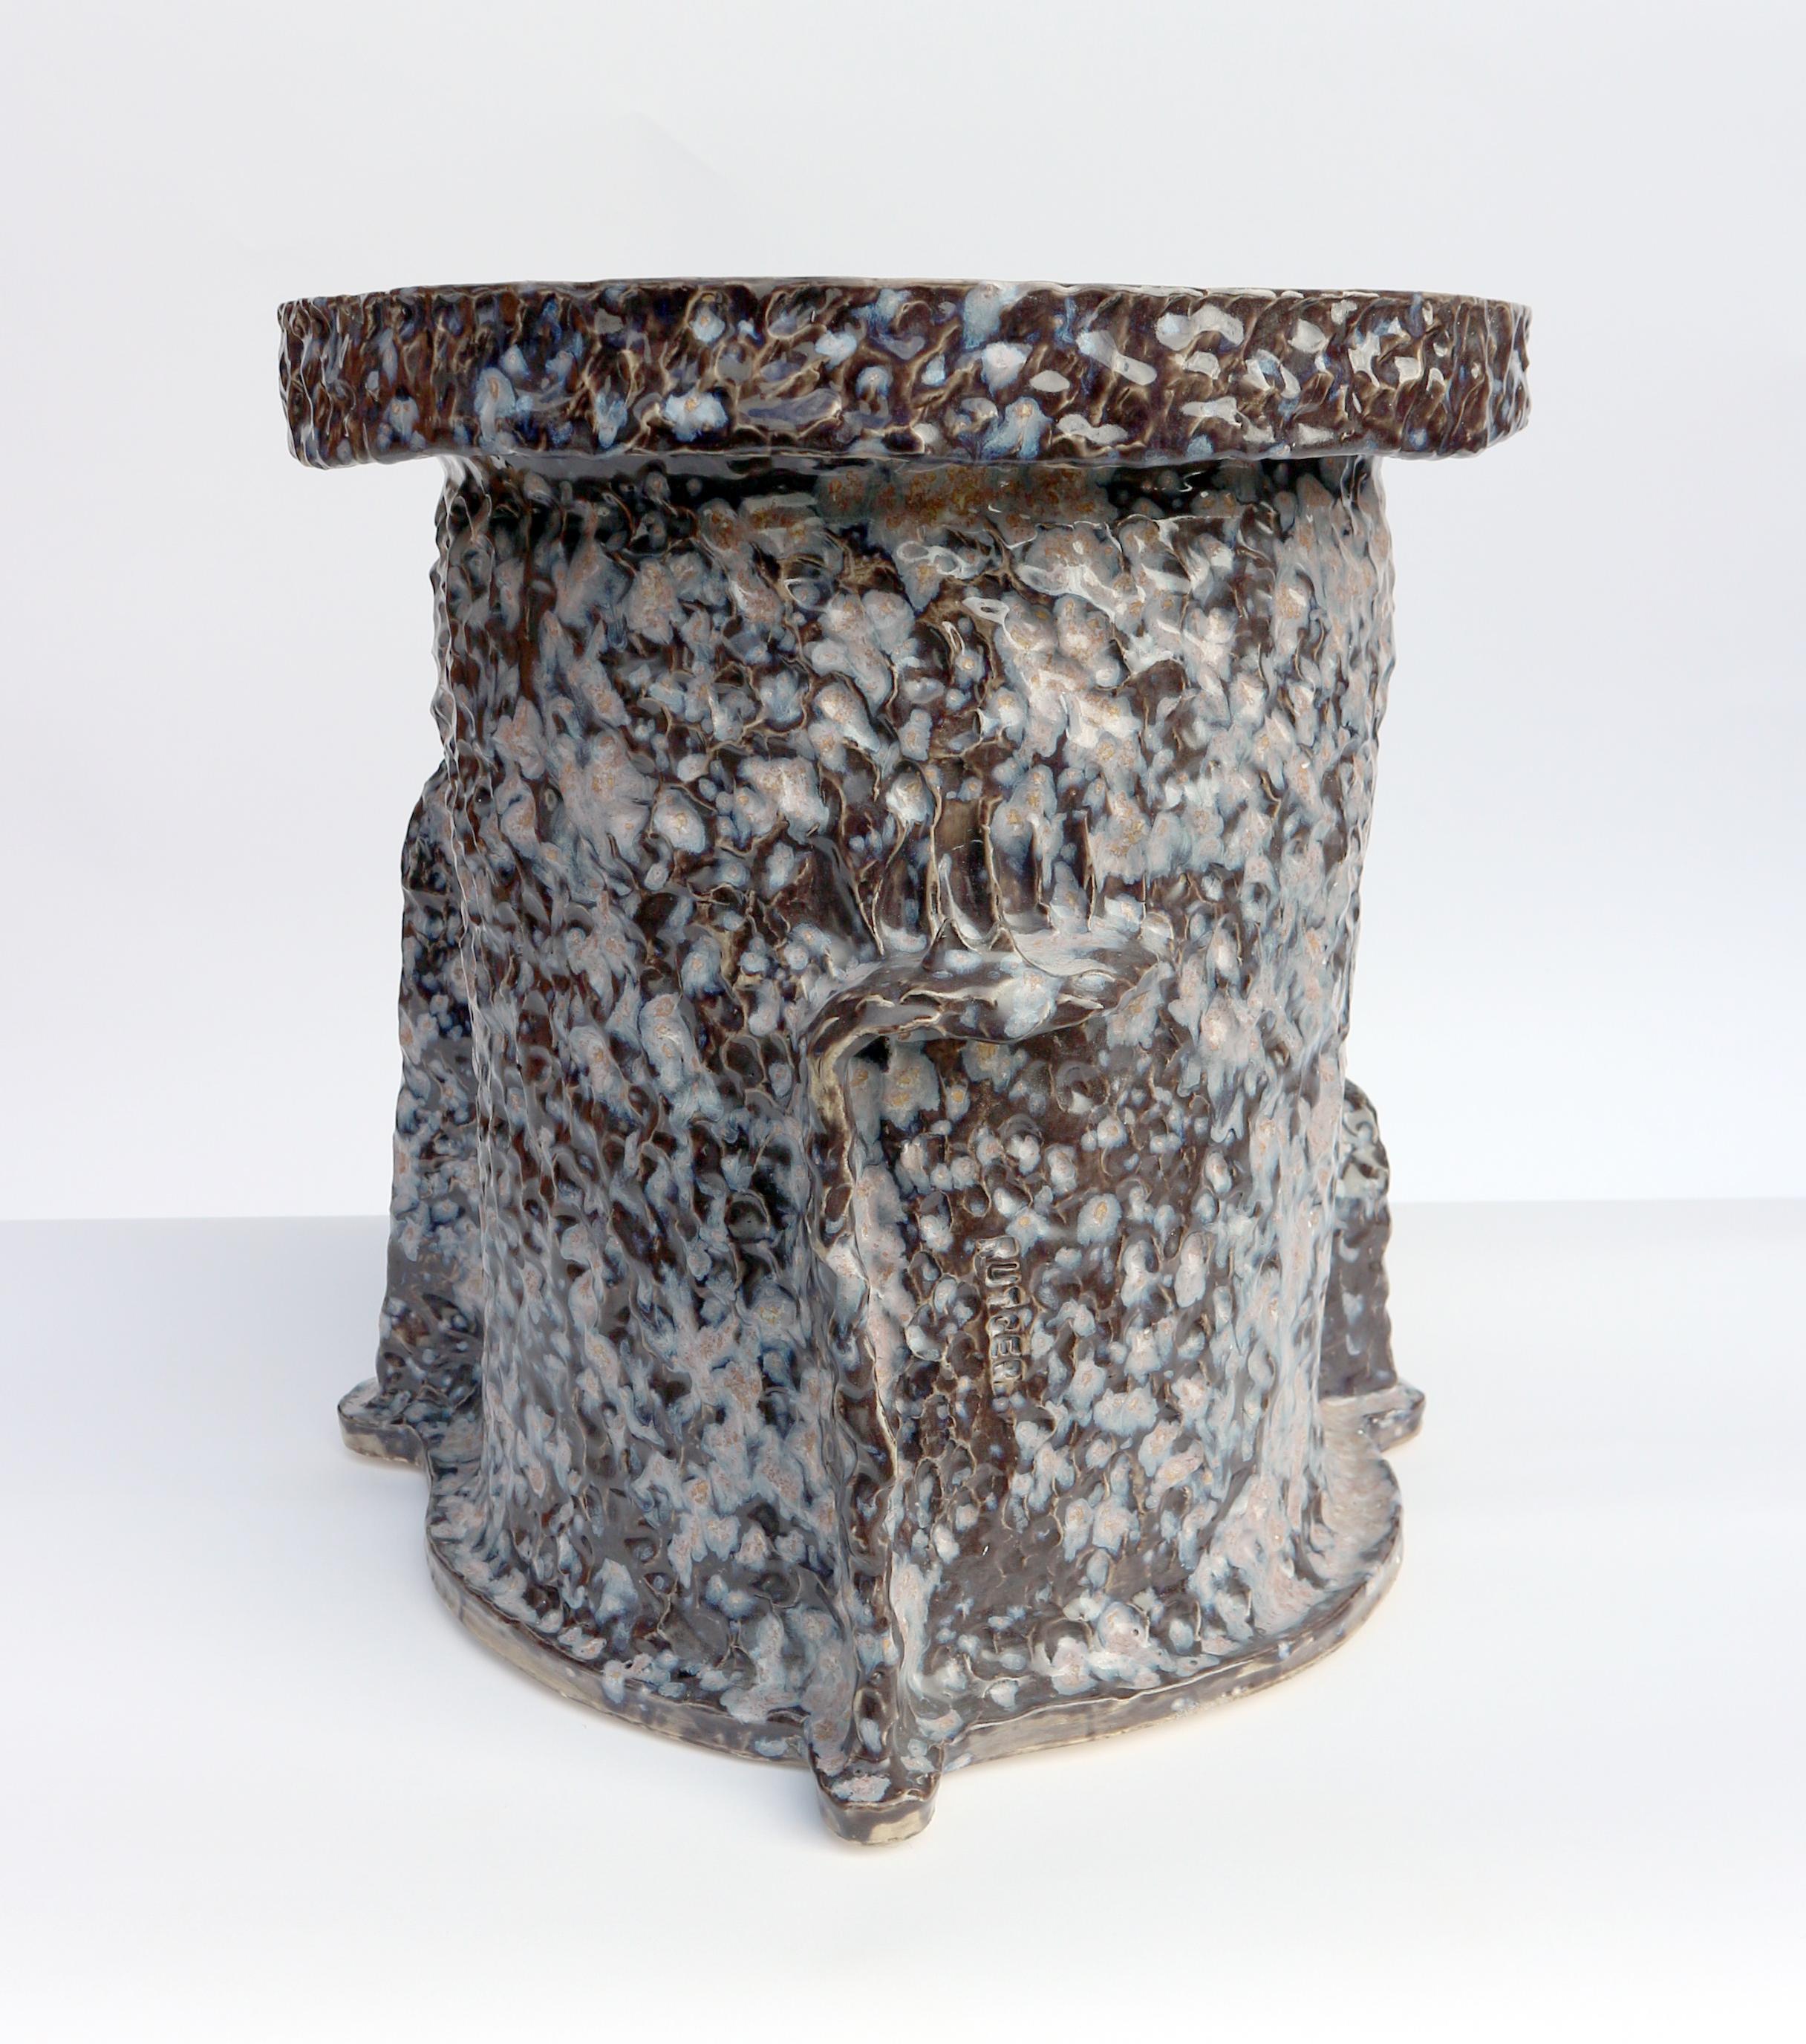 Hand-build stoneware side table, leaving fingerprints of the artist to emphasise on the handmade character. 

The piece is a one-off and signed by the artist.

The stoneware side table can be used outside and has a bold  black glaze with purple